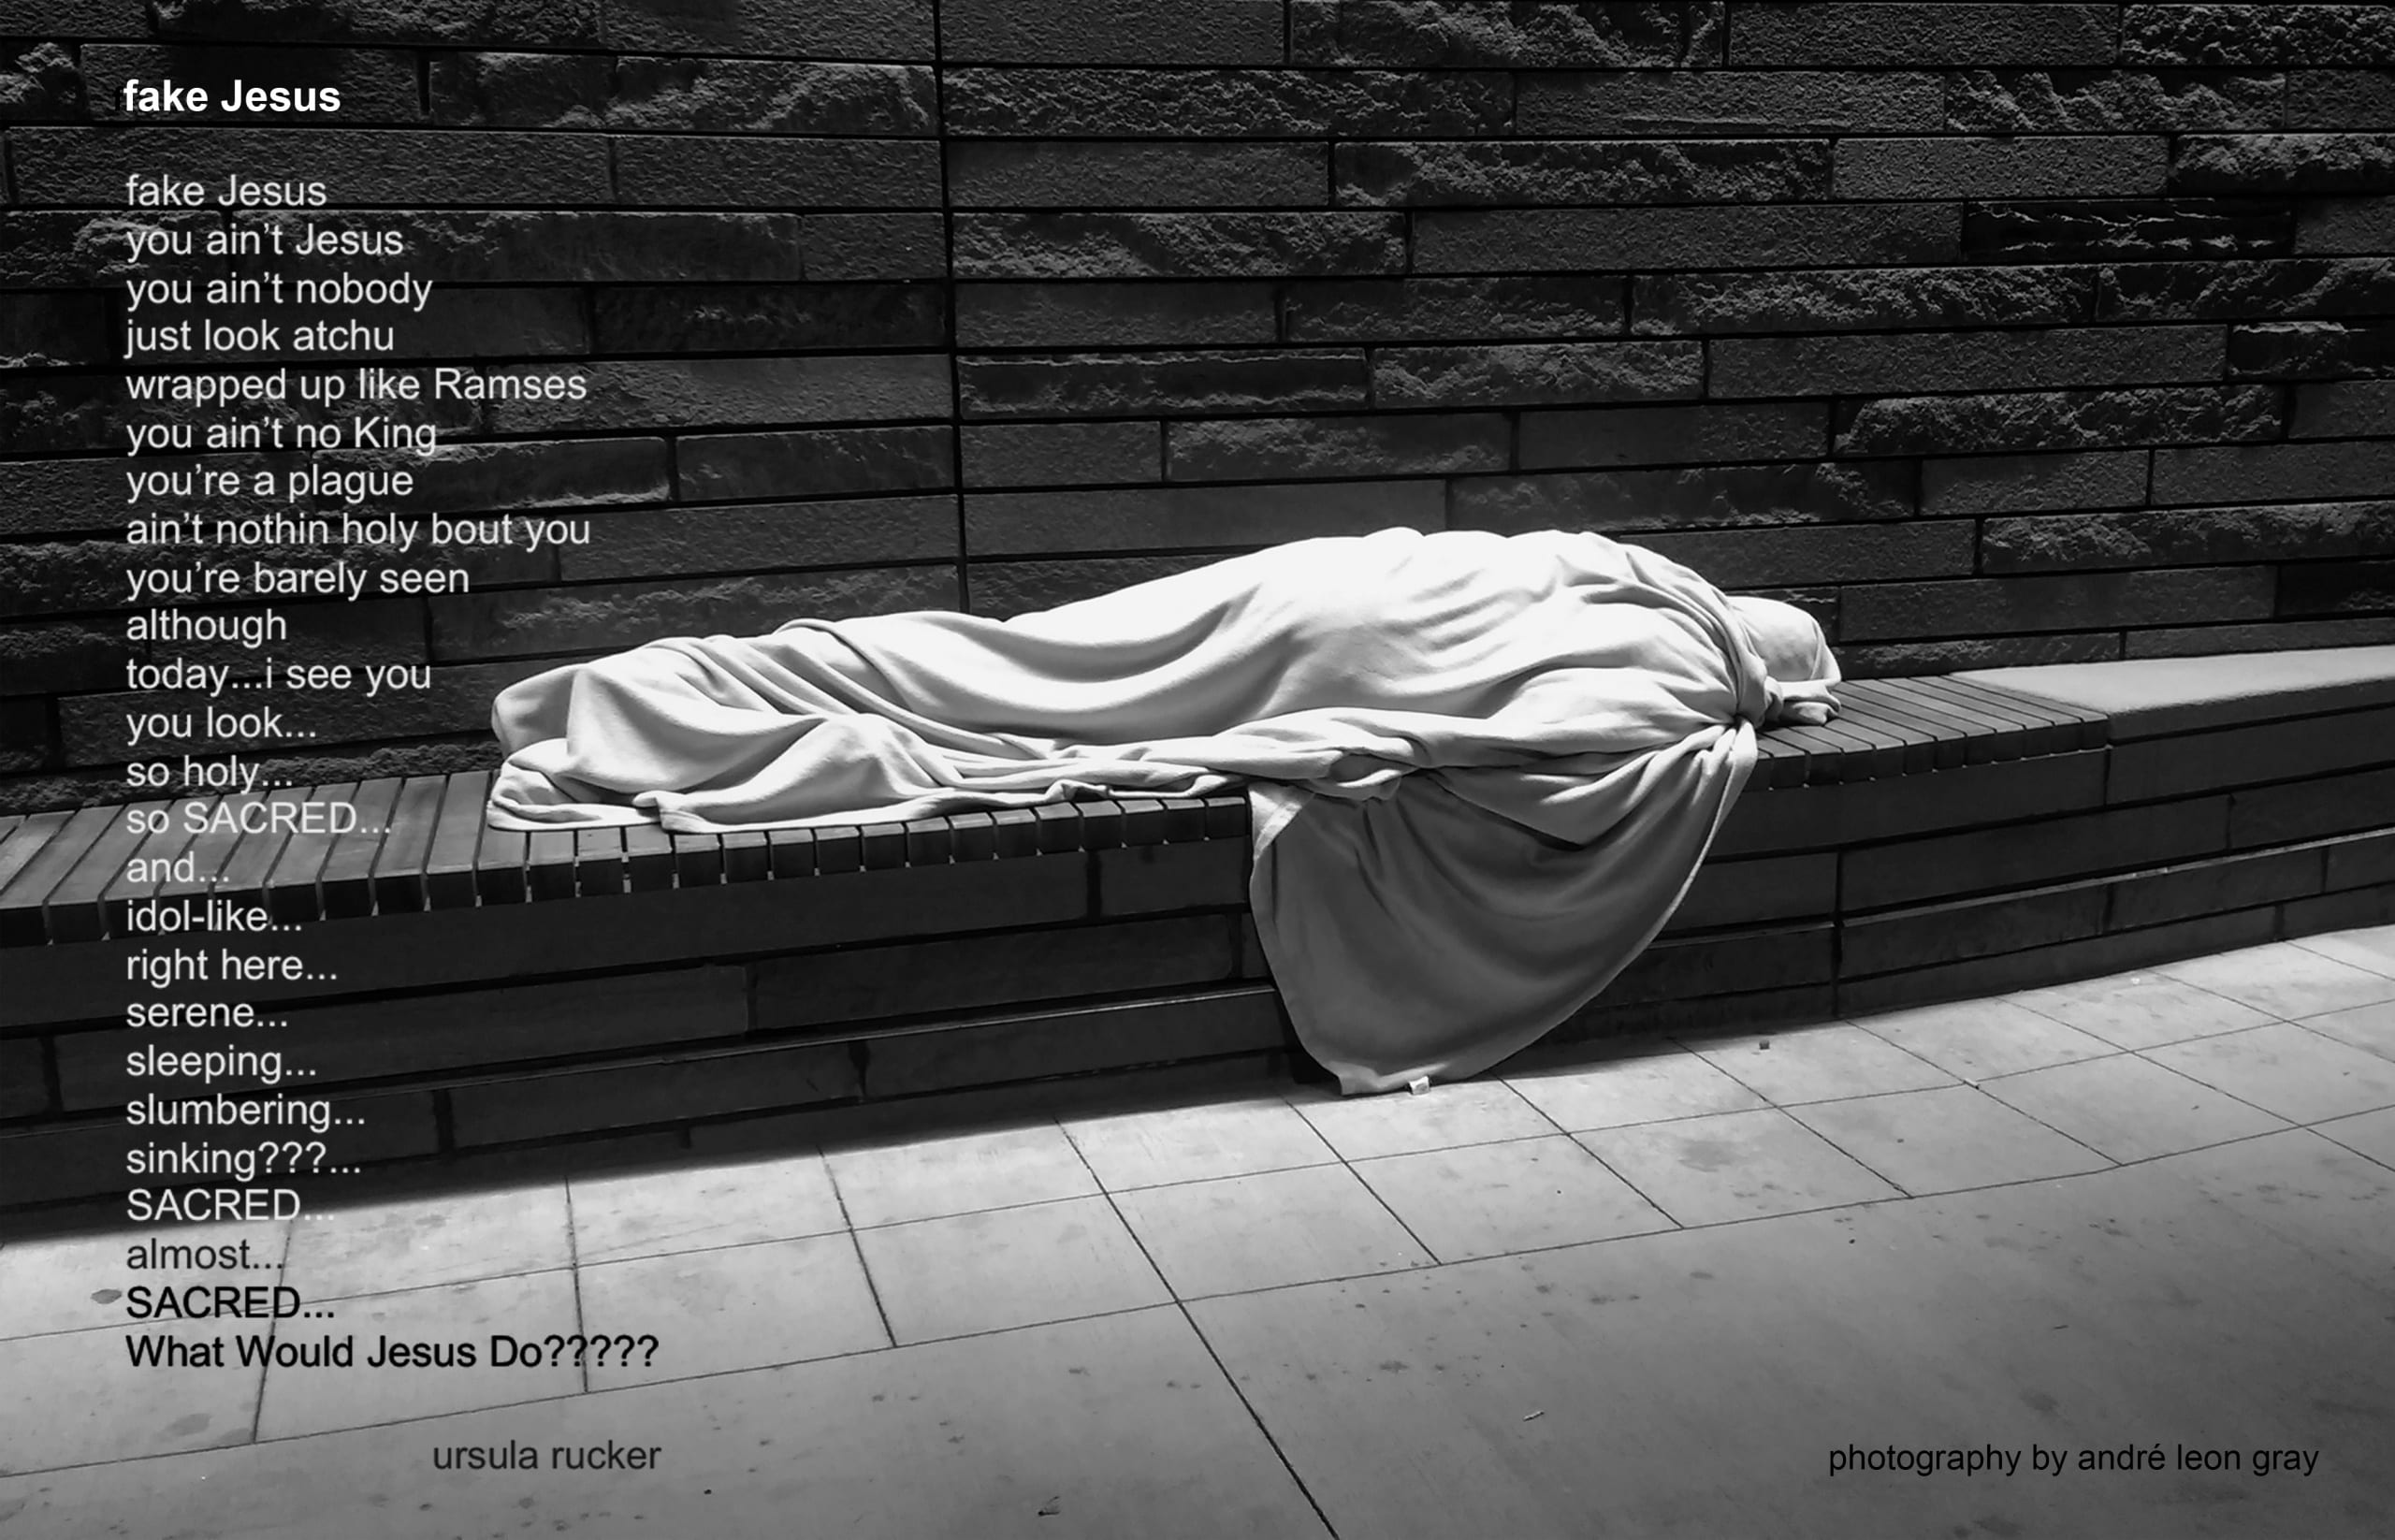 Black and white photo of figure wrapped in cloth from head to toe and laid horizontally on a low, wooden bench against a building’s exterior stone wall with a poem superimposed over the left side of the image